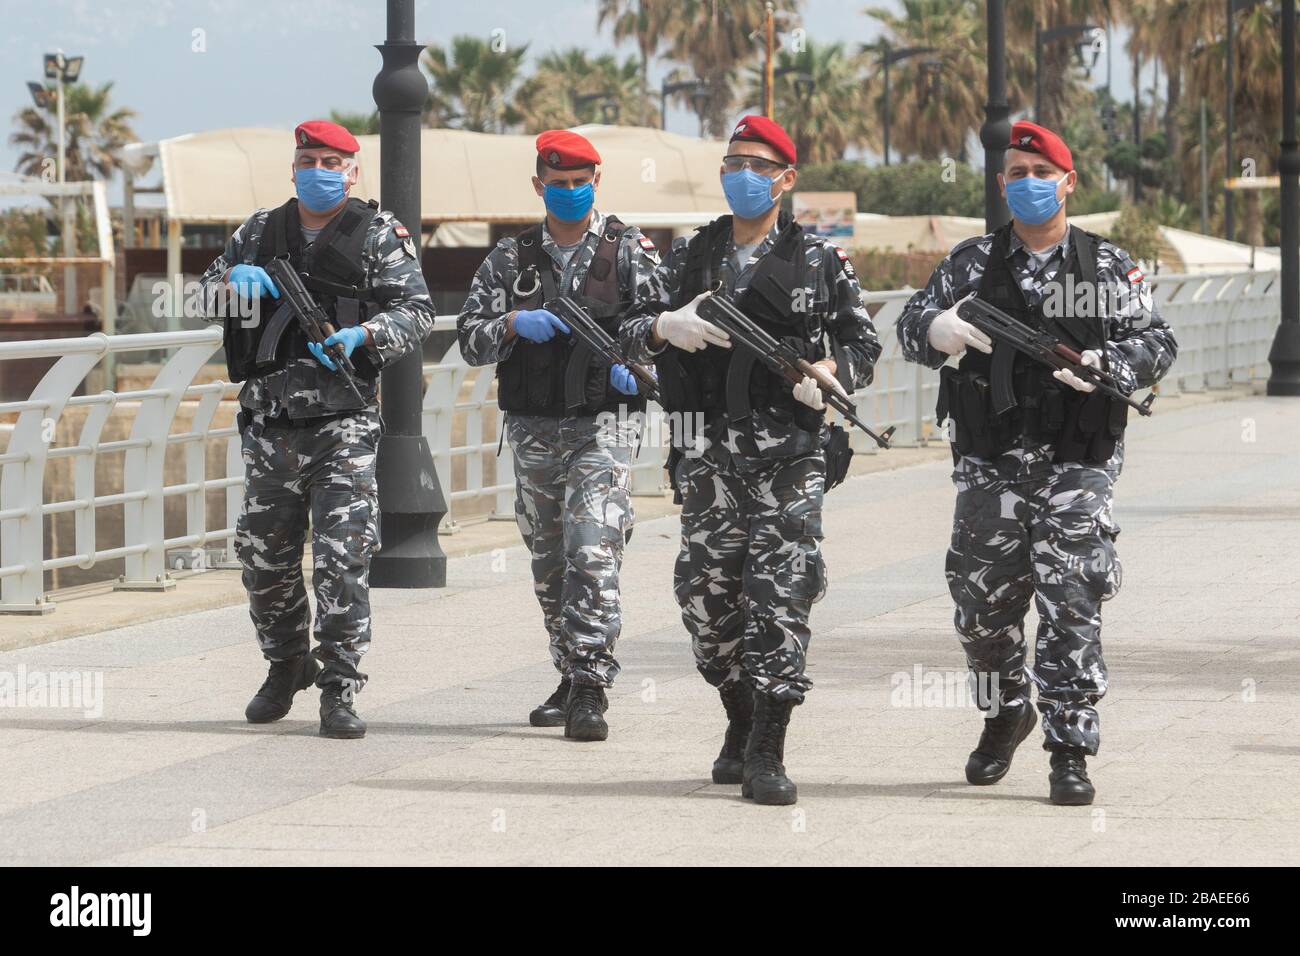 Beirut, Lebanon. 27 March 2020. Armed Lebanese police wearing protective gloves and facemasks patrol Beirut seafront to enforce the lockdown and prevent public gatherings as preventive measures to stop the spread of COVID-19 coronavirus. Credit: amer ghazzal/Alamy Live News Stock Photo